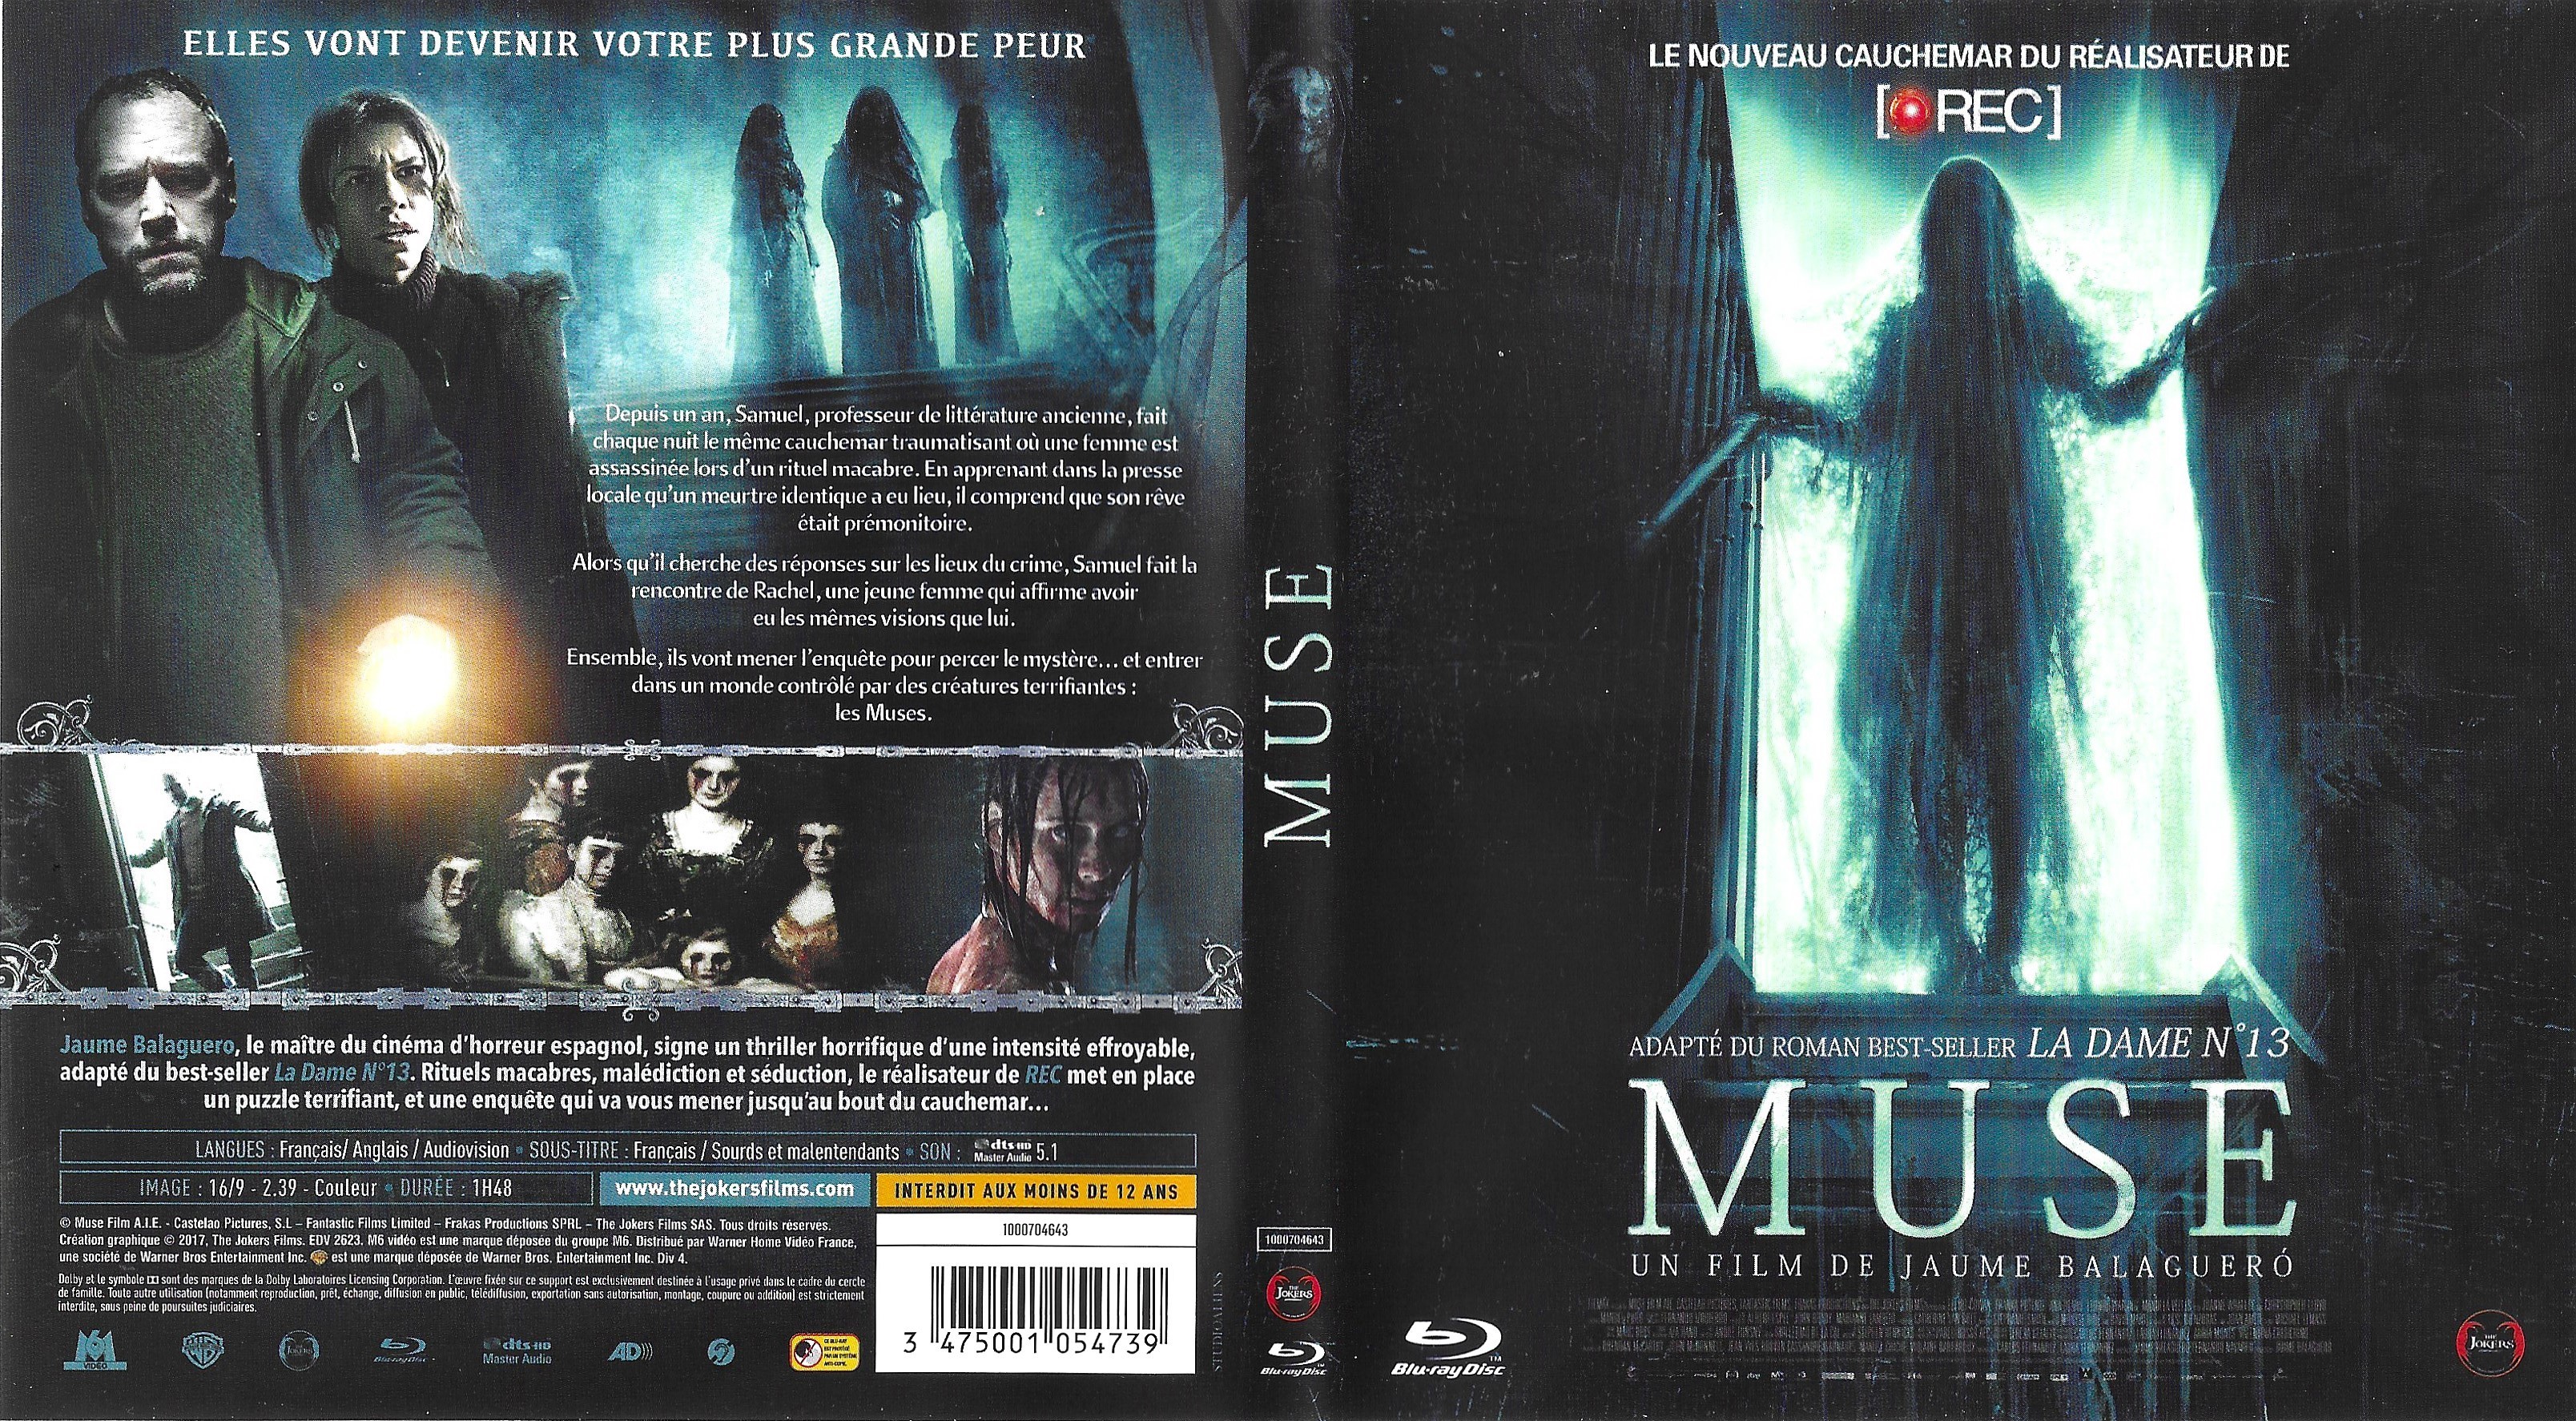 Jaquette DVD Muse (BLU-RAY)